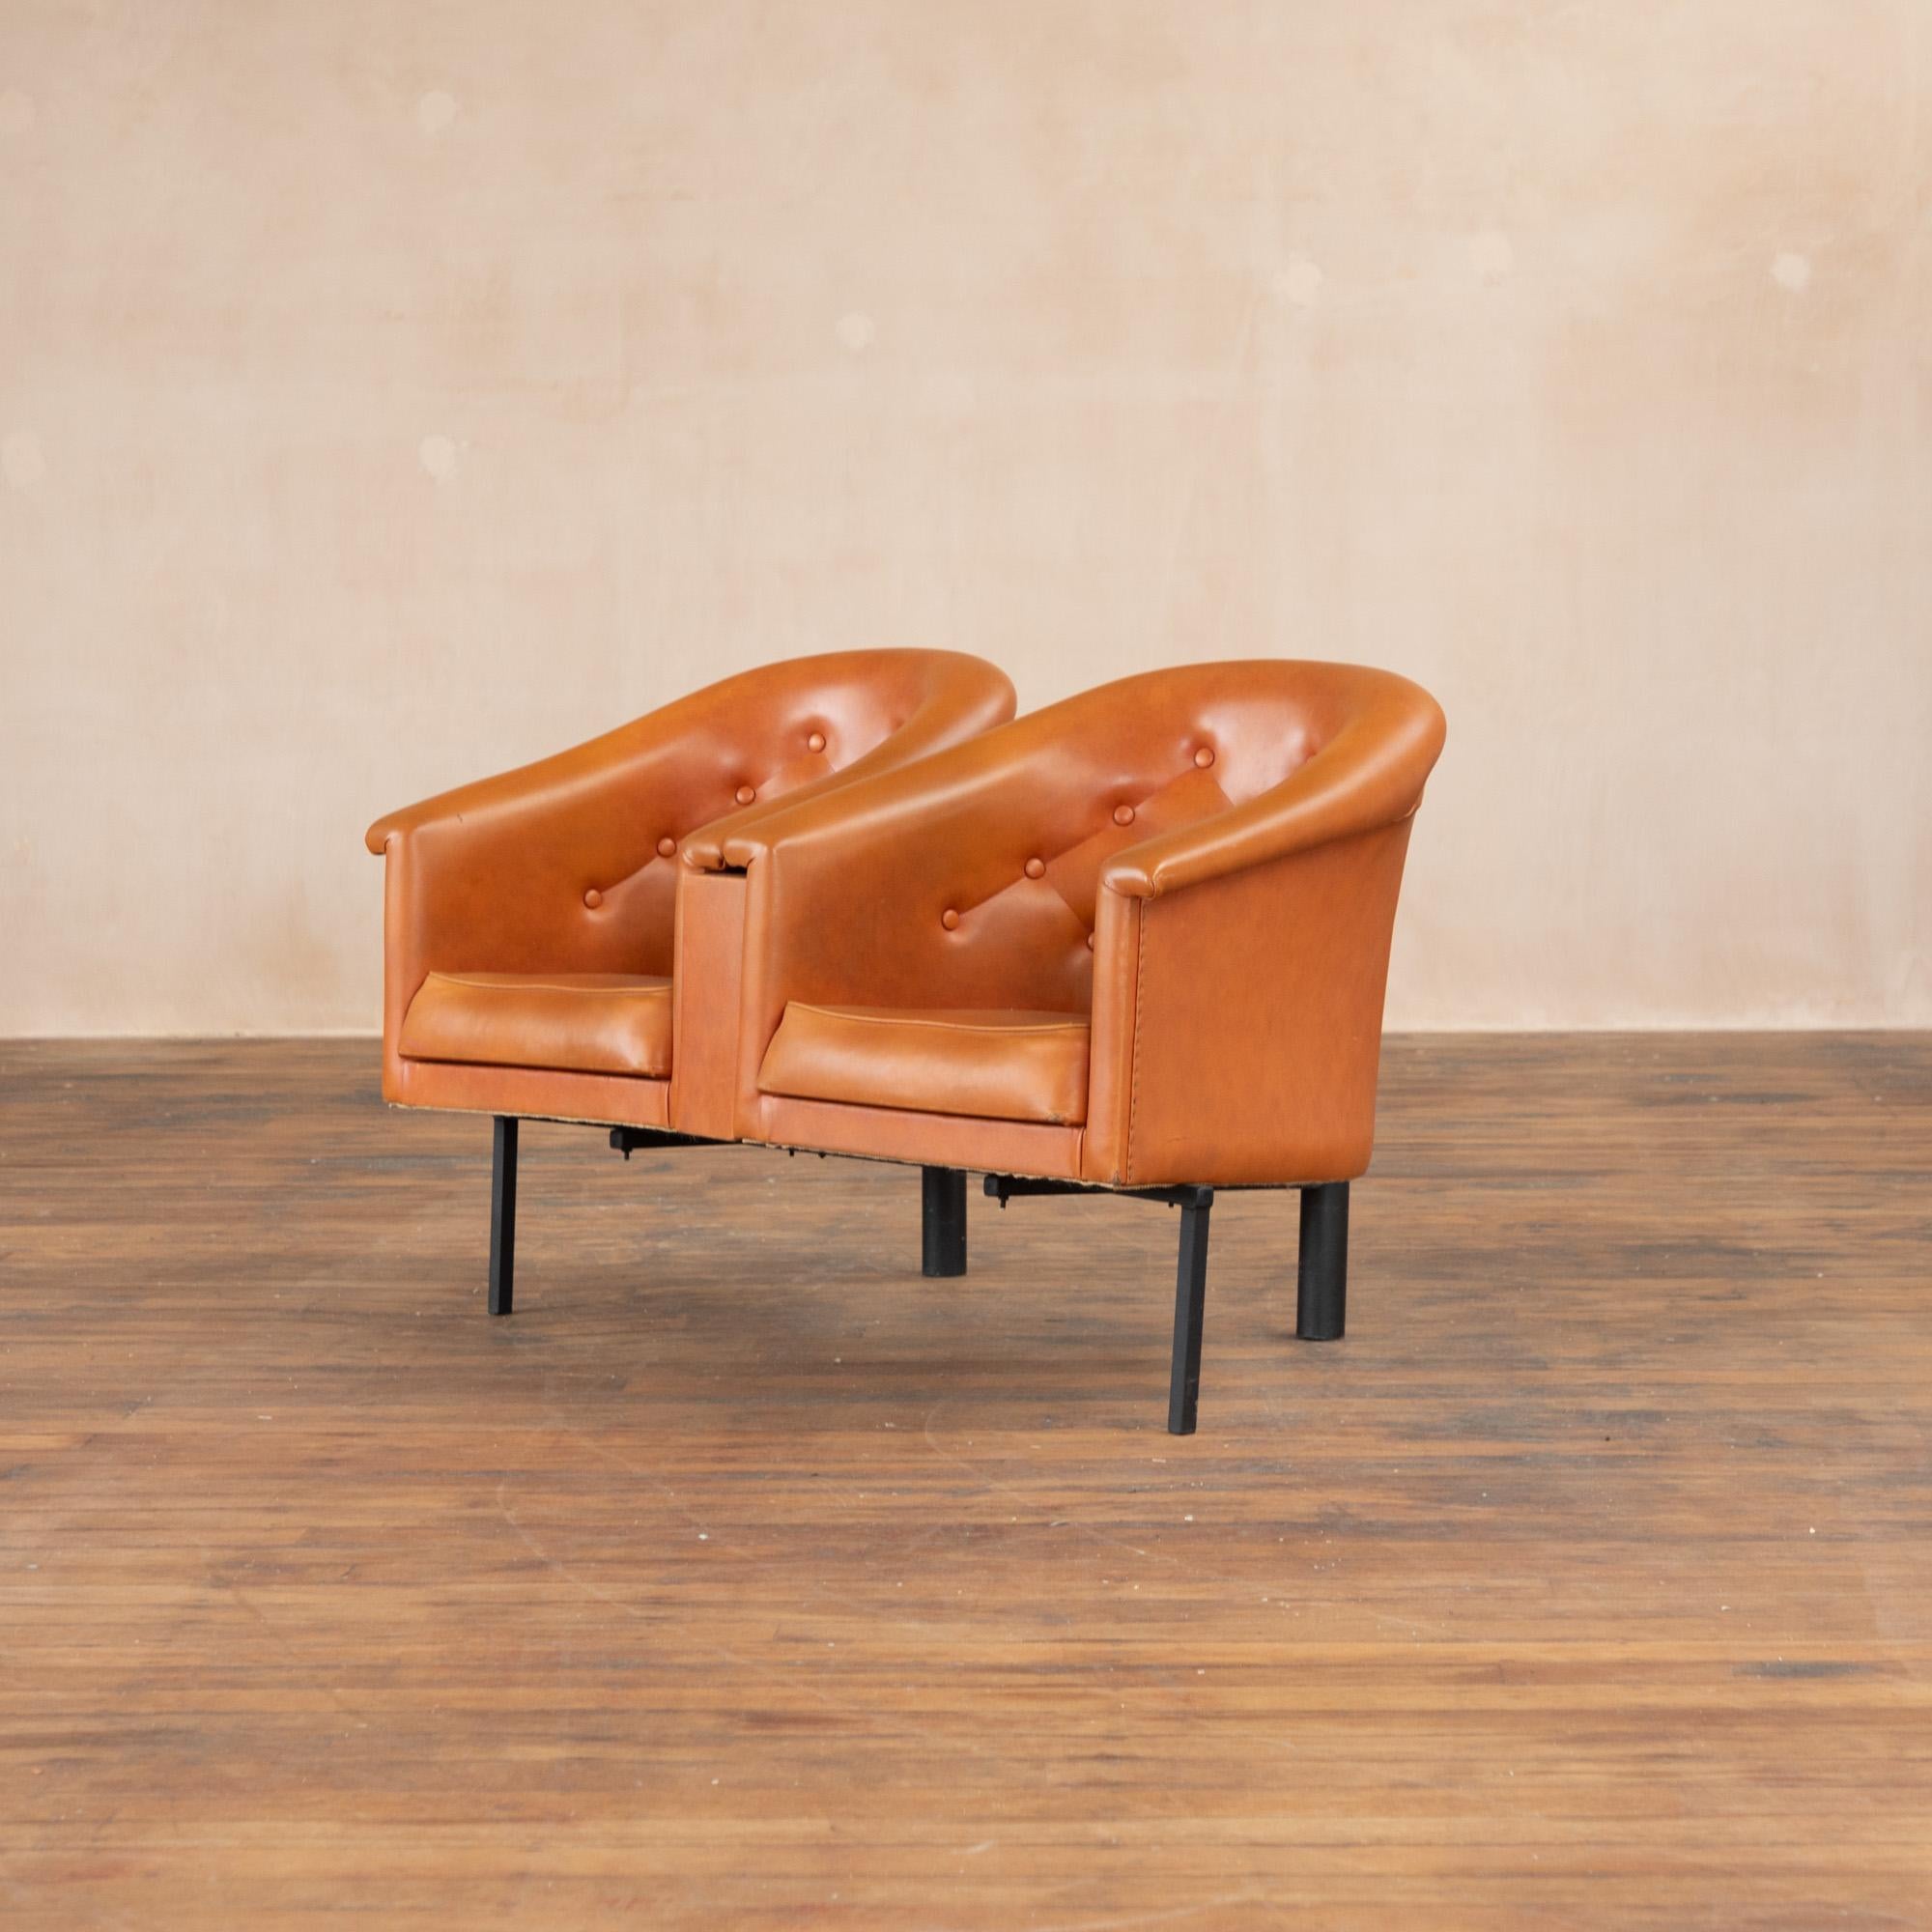 The cutest set of  1960s tub chairs taken from a hairdressers in the UK. Orange vinyl with buttoned back detail. Ideal for hallway or waiting room.
Vinyl is vibrant and is generally in good condition apart from on one arm where there is a small slit